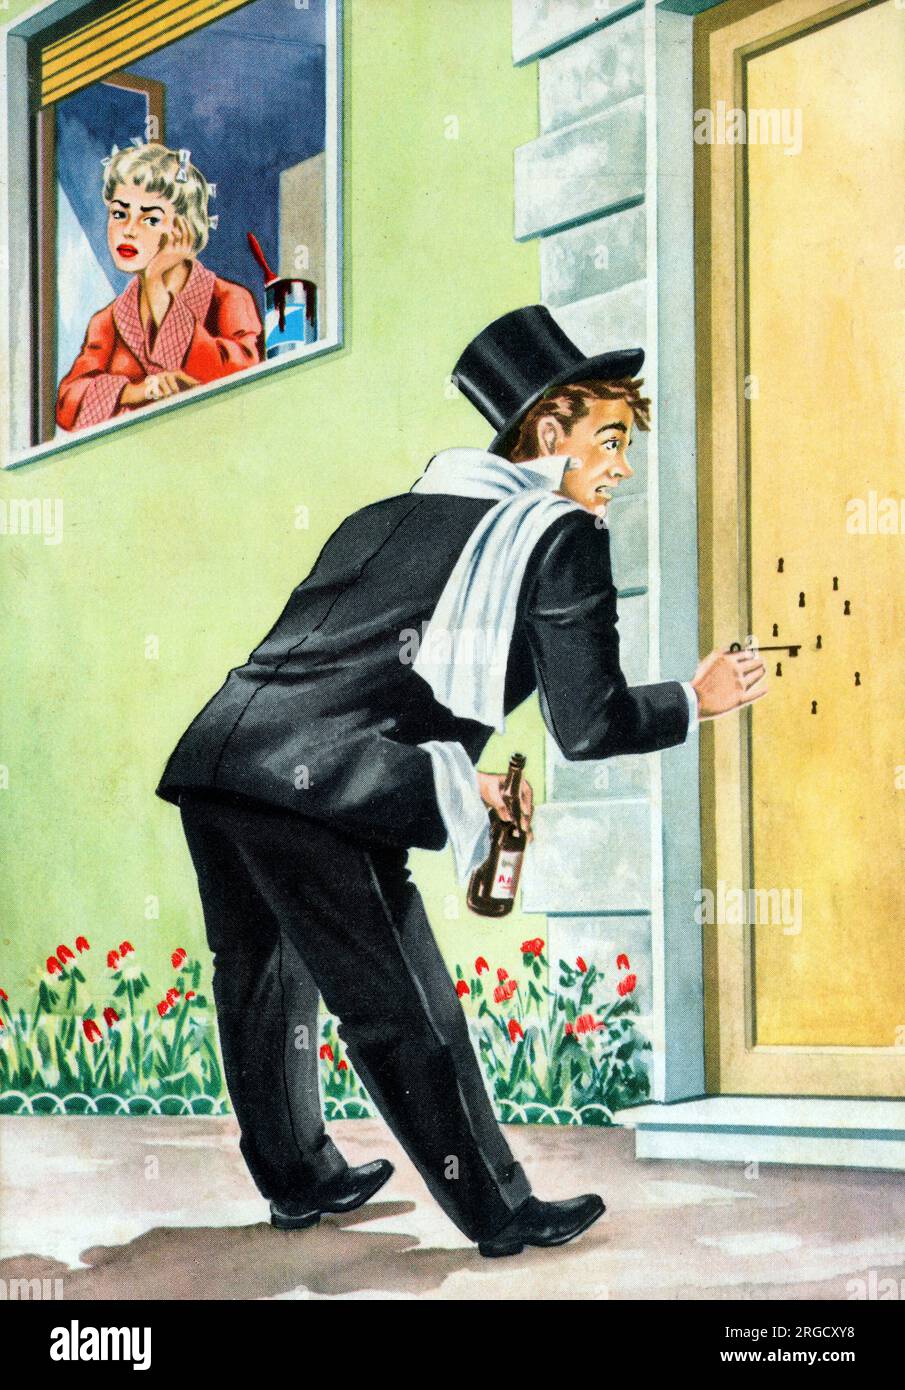 Italian comic postcard - a young man (rather worse for wear) returns home after a posh (yet boozy) night out only to be befuddled by his less-than-pleased (but pretty cunning) wife, who has painted multiple additional keyholes on the front door, further confusing the young dandy's addled brain!! Stock Photo